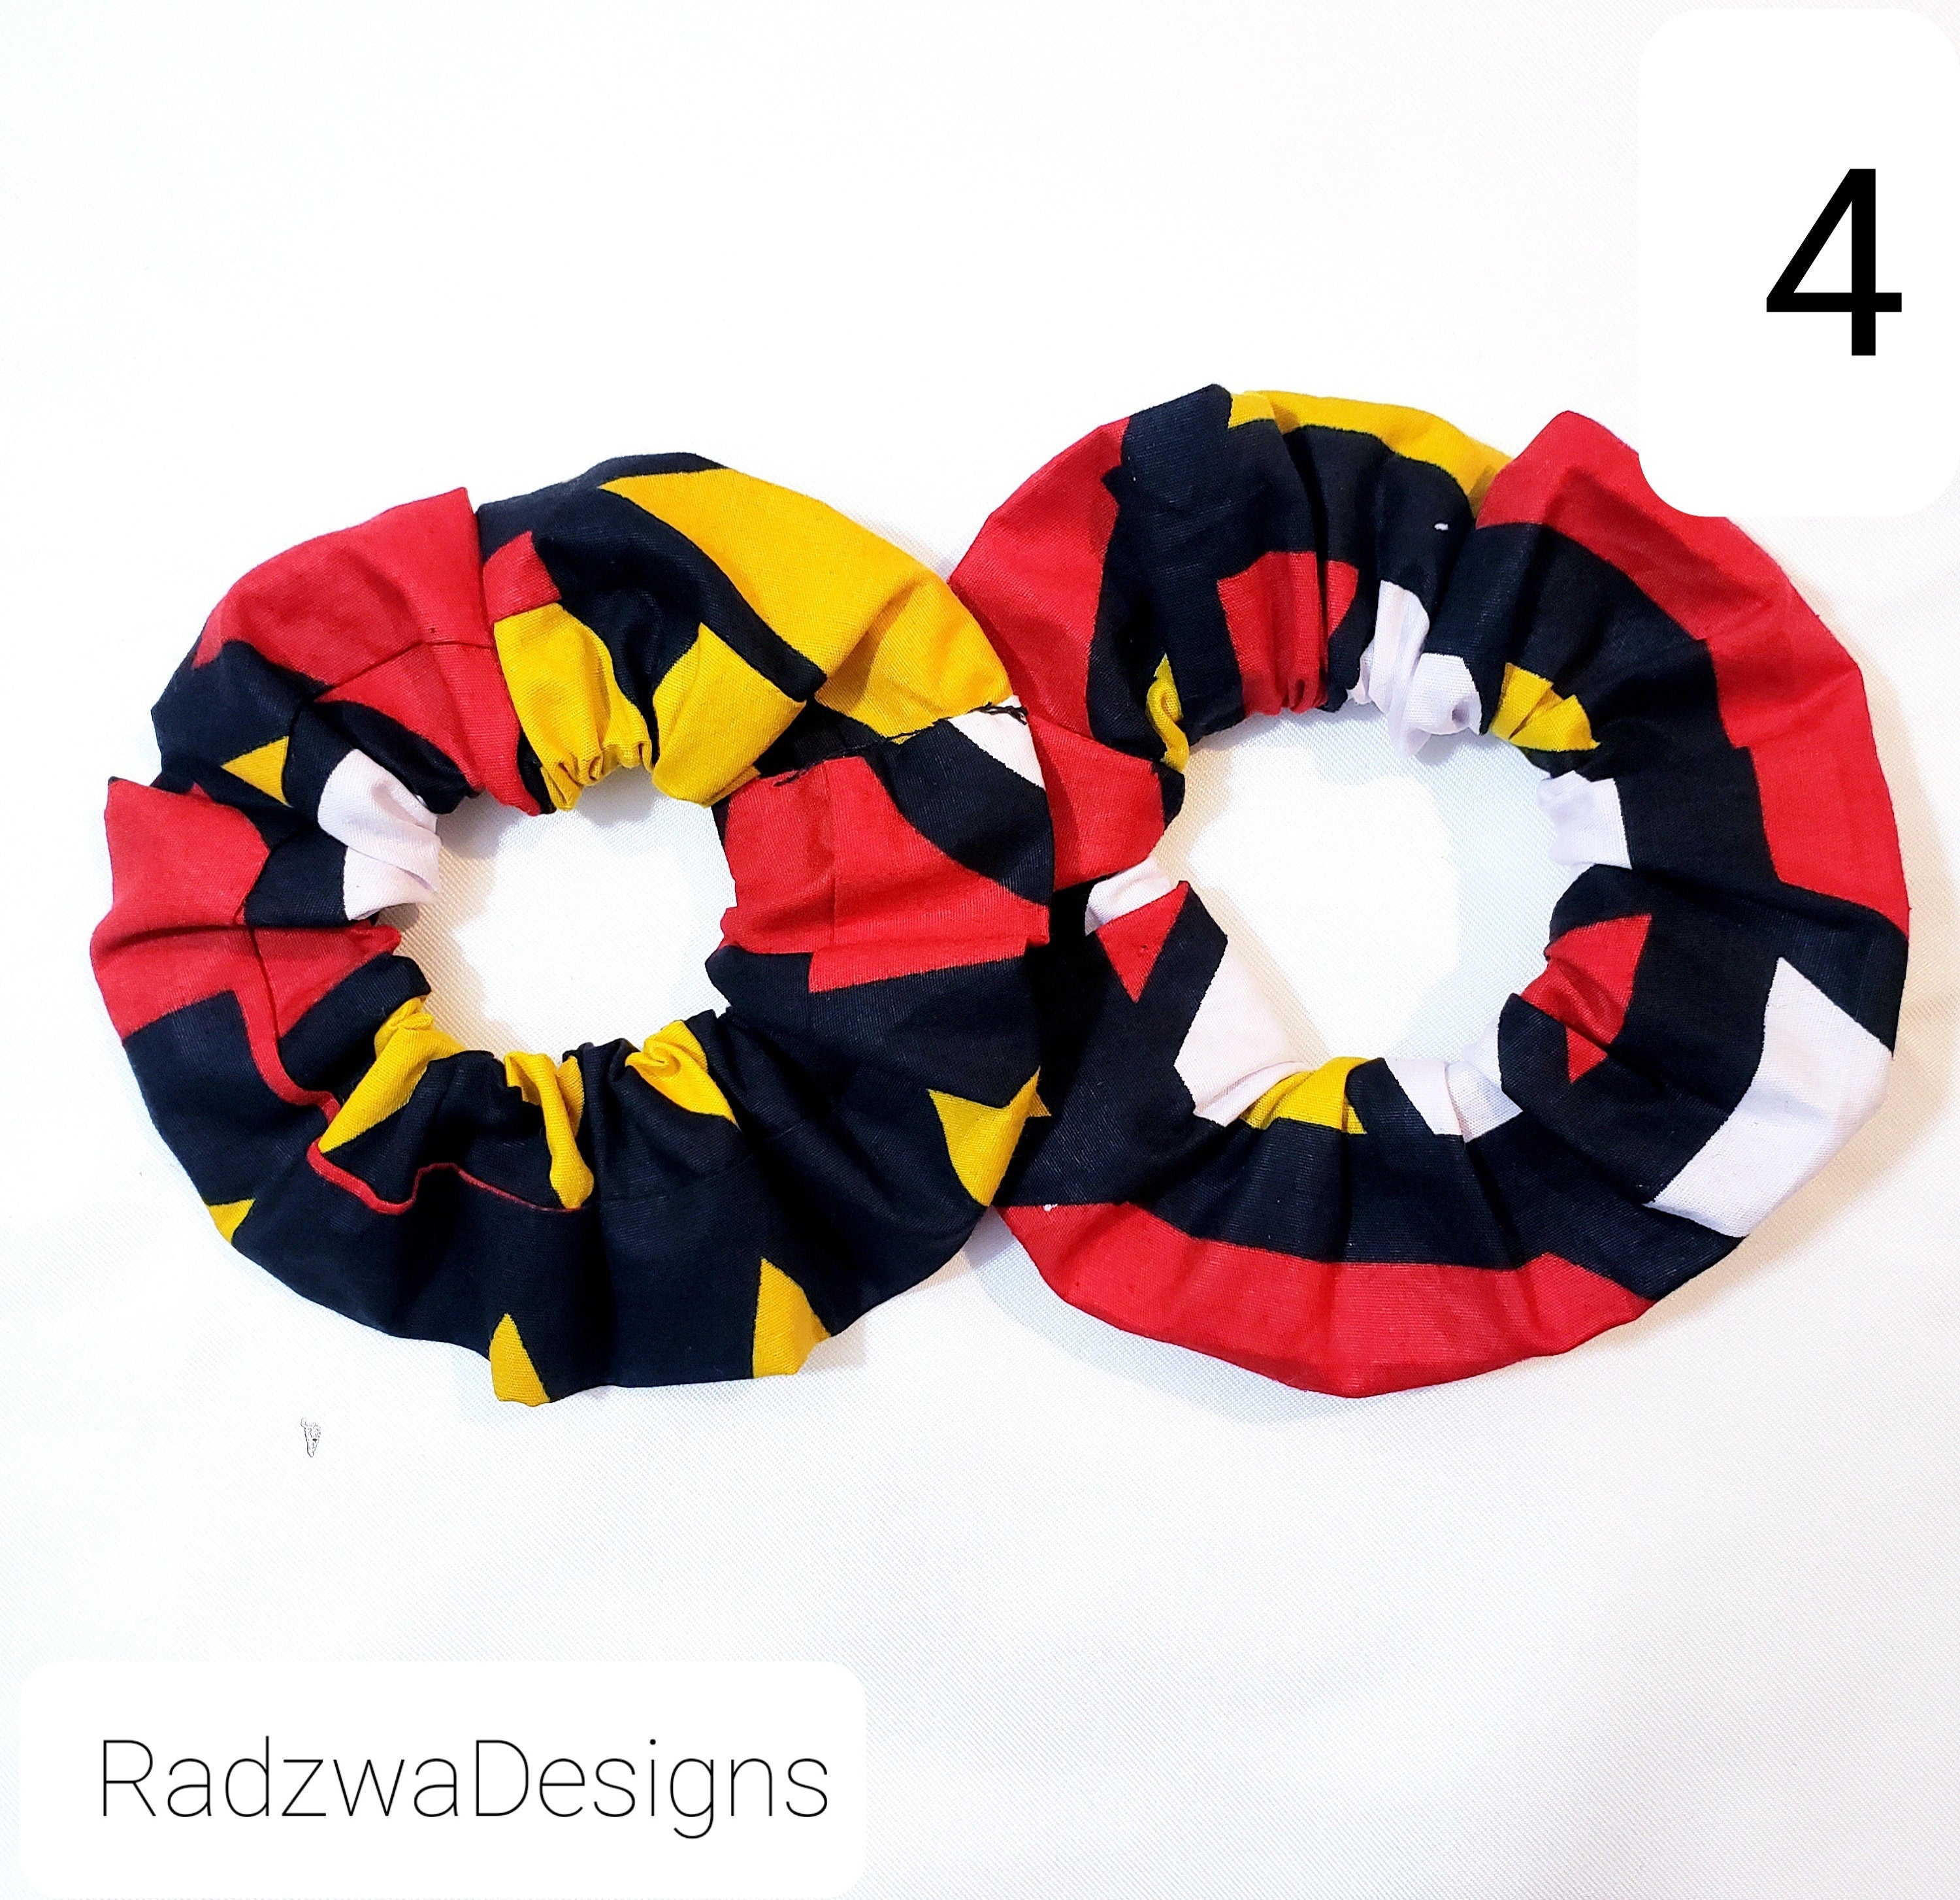 Colorful scrunchies pack of 2 in African print, ankara scrunchies set of 2, African print scrunchie